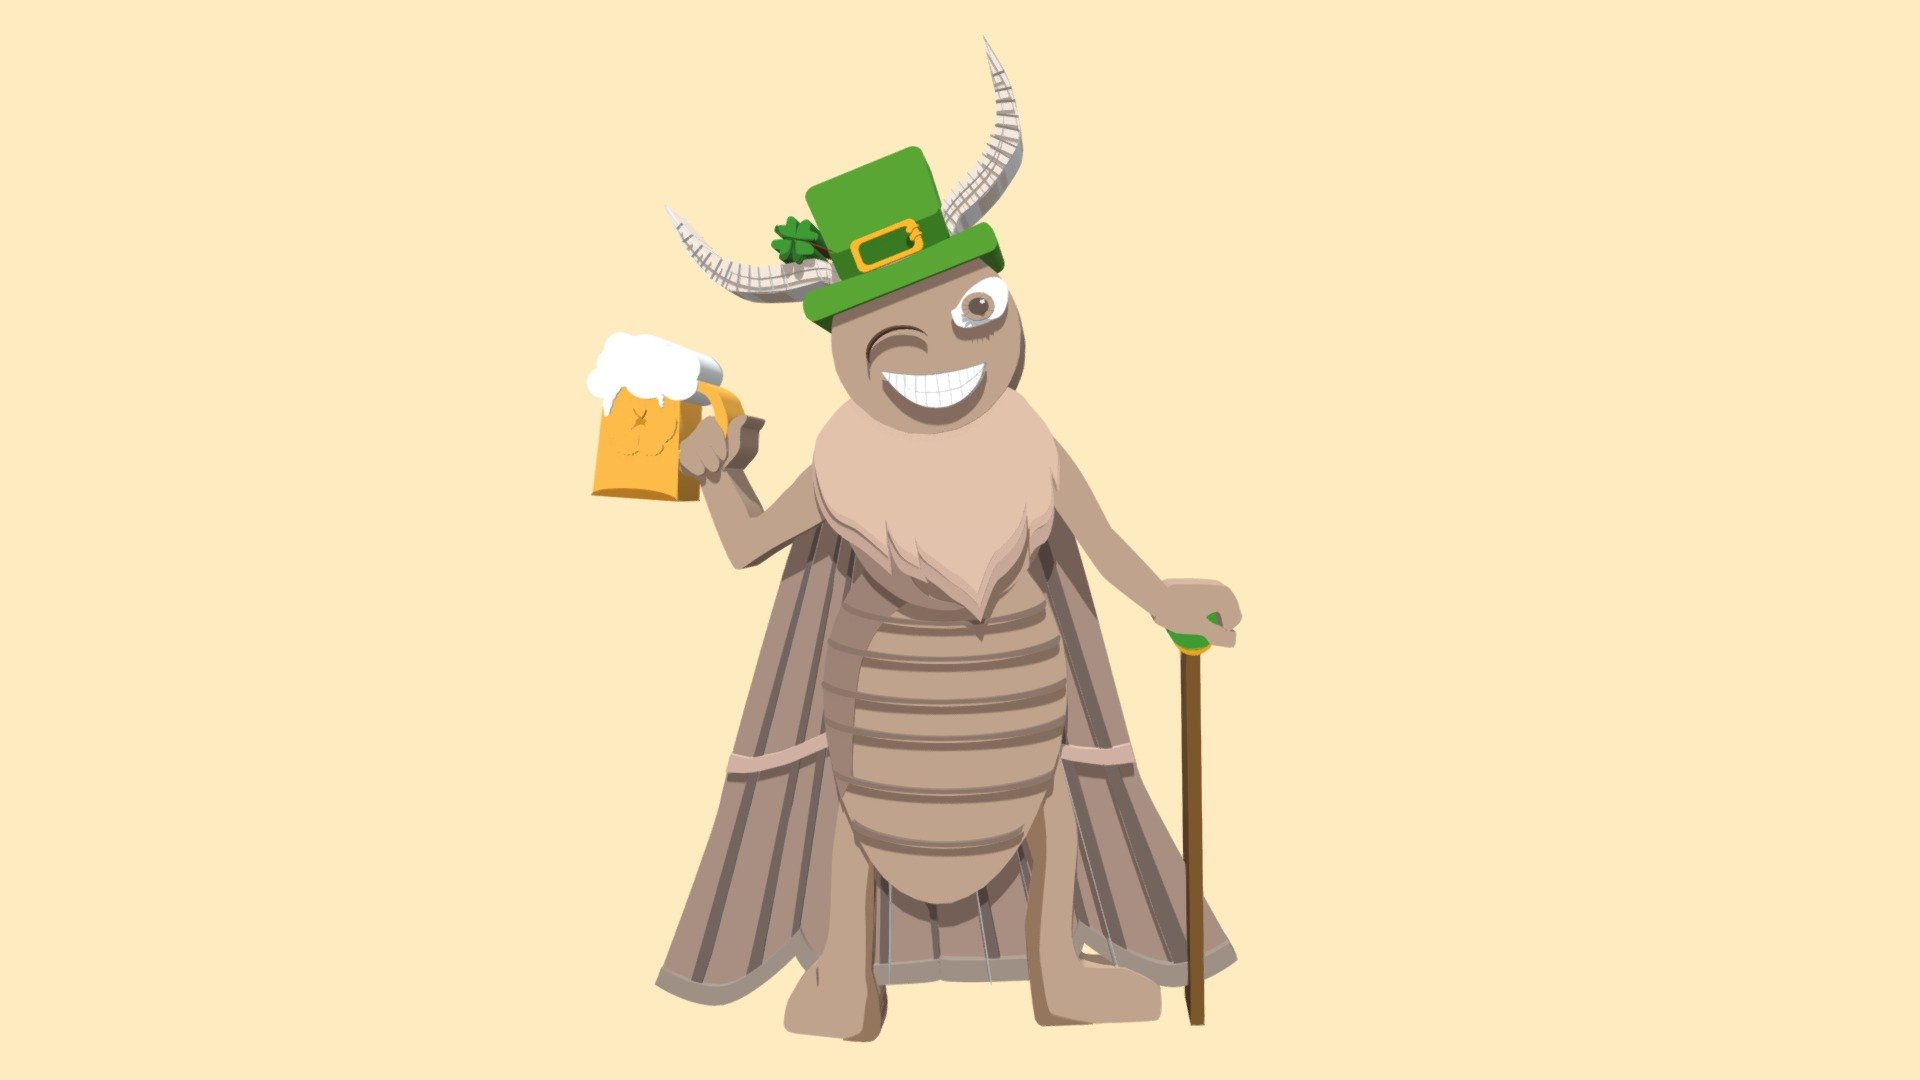 I don't 100% remember how I came to this conclusion, lol, but what I do remember is that I wanted some sort of funny Irish pub icon but something different from like a leprachun. Actually I lied, I know how I came to this conclusion. I chose the Irish moth since I haven't seen this one yet and wanted to see how this would turn out in the end. Making this into a real thing is also someting I thought about. Transitioned him from Illustrator to Blender 3d model